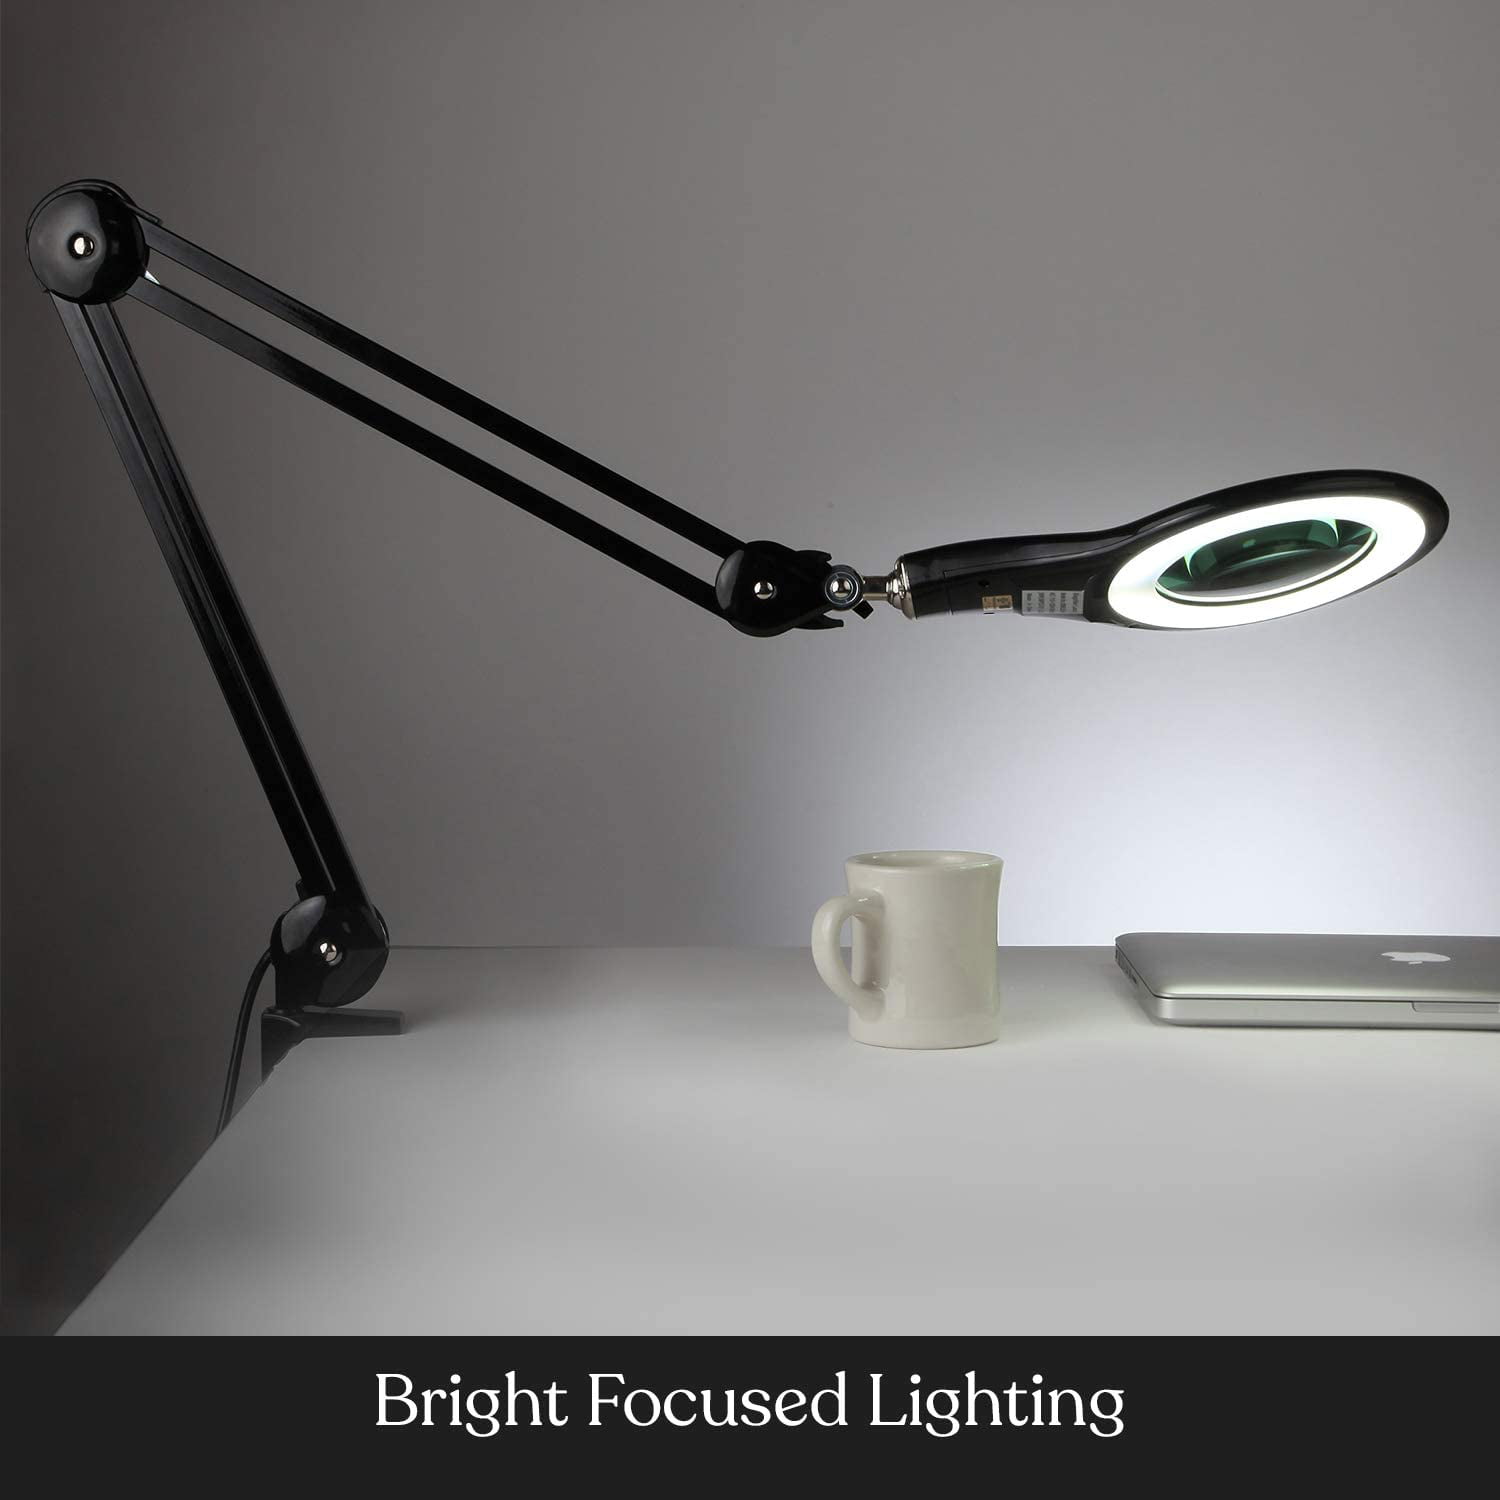 LightView PRO Magnifying Desk Lamp 2.25x Light Magnifier Adjustable Magnifying  Glass with Light for Crafts Reading Close Work - Black 